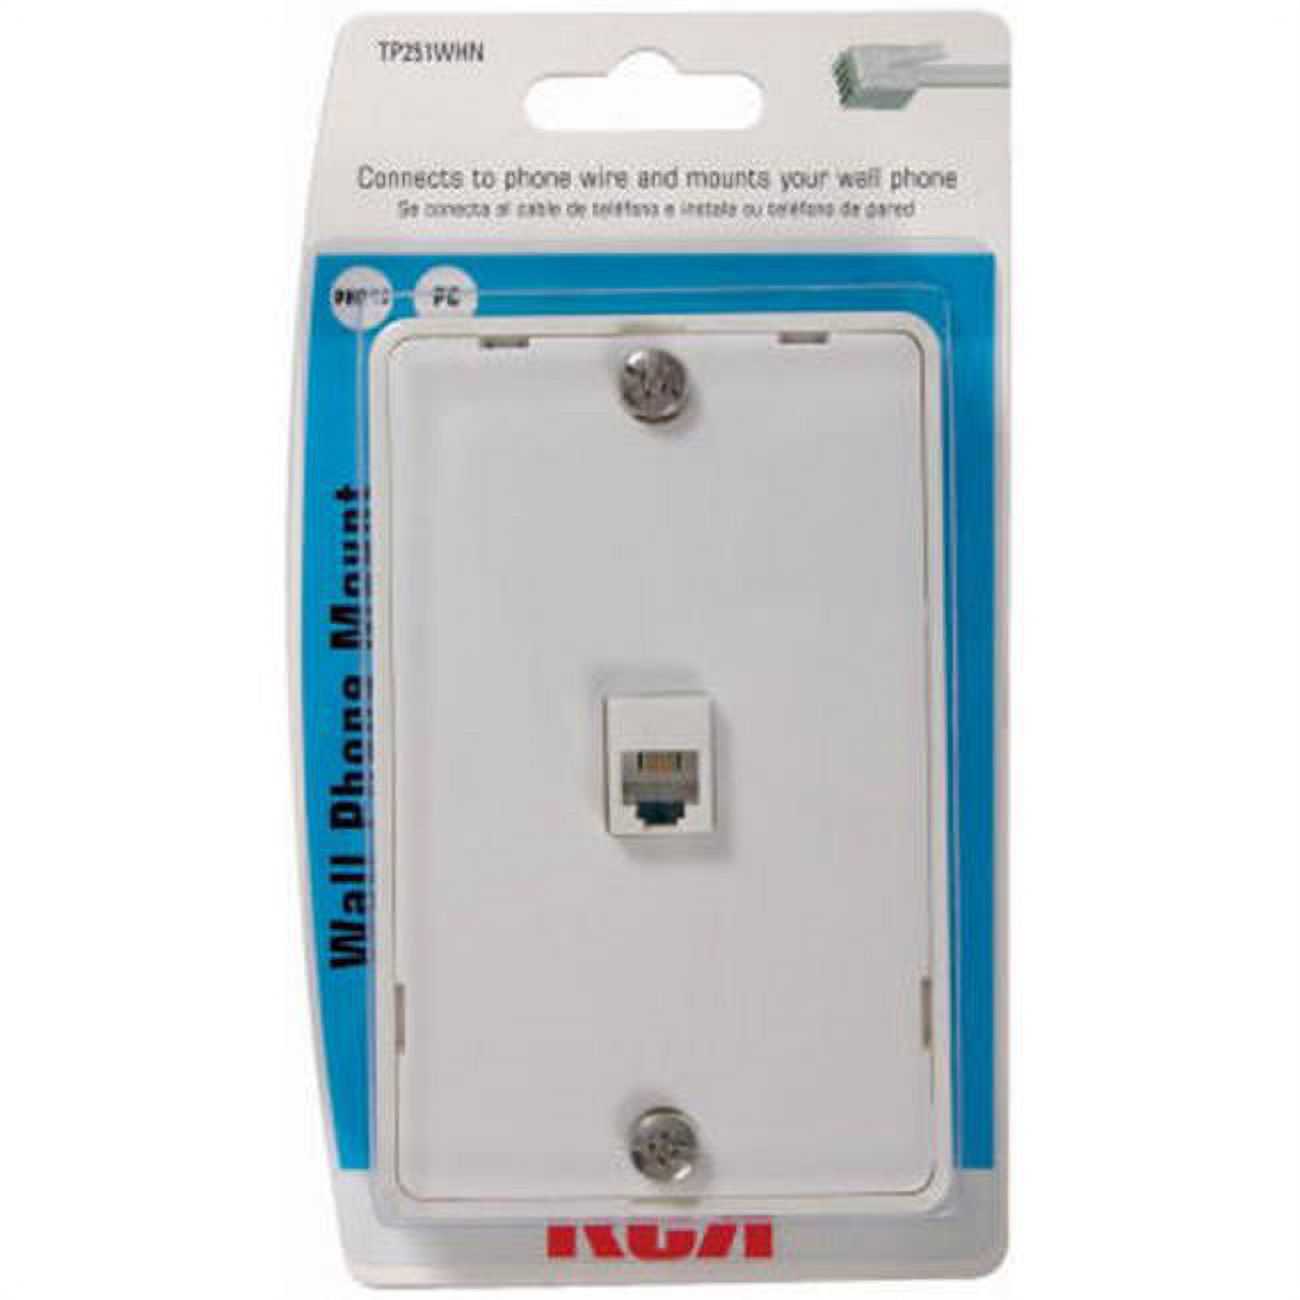 RCA White Wall Telephone Jack TP251WHR - image 1 of 2